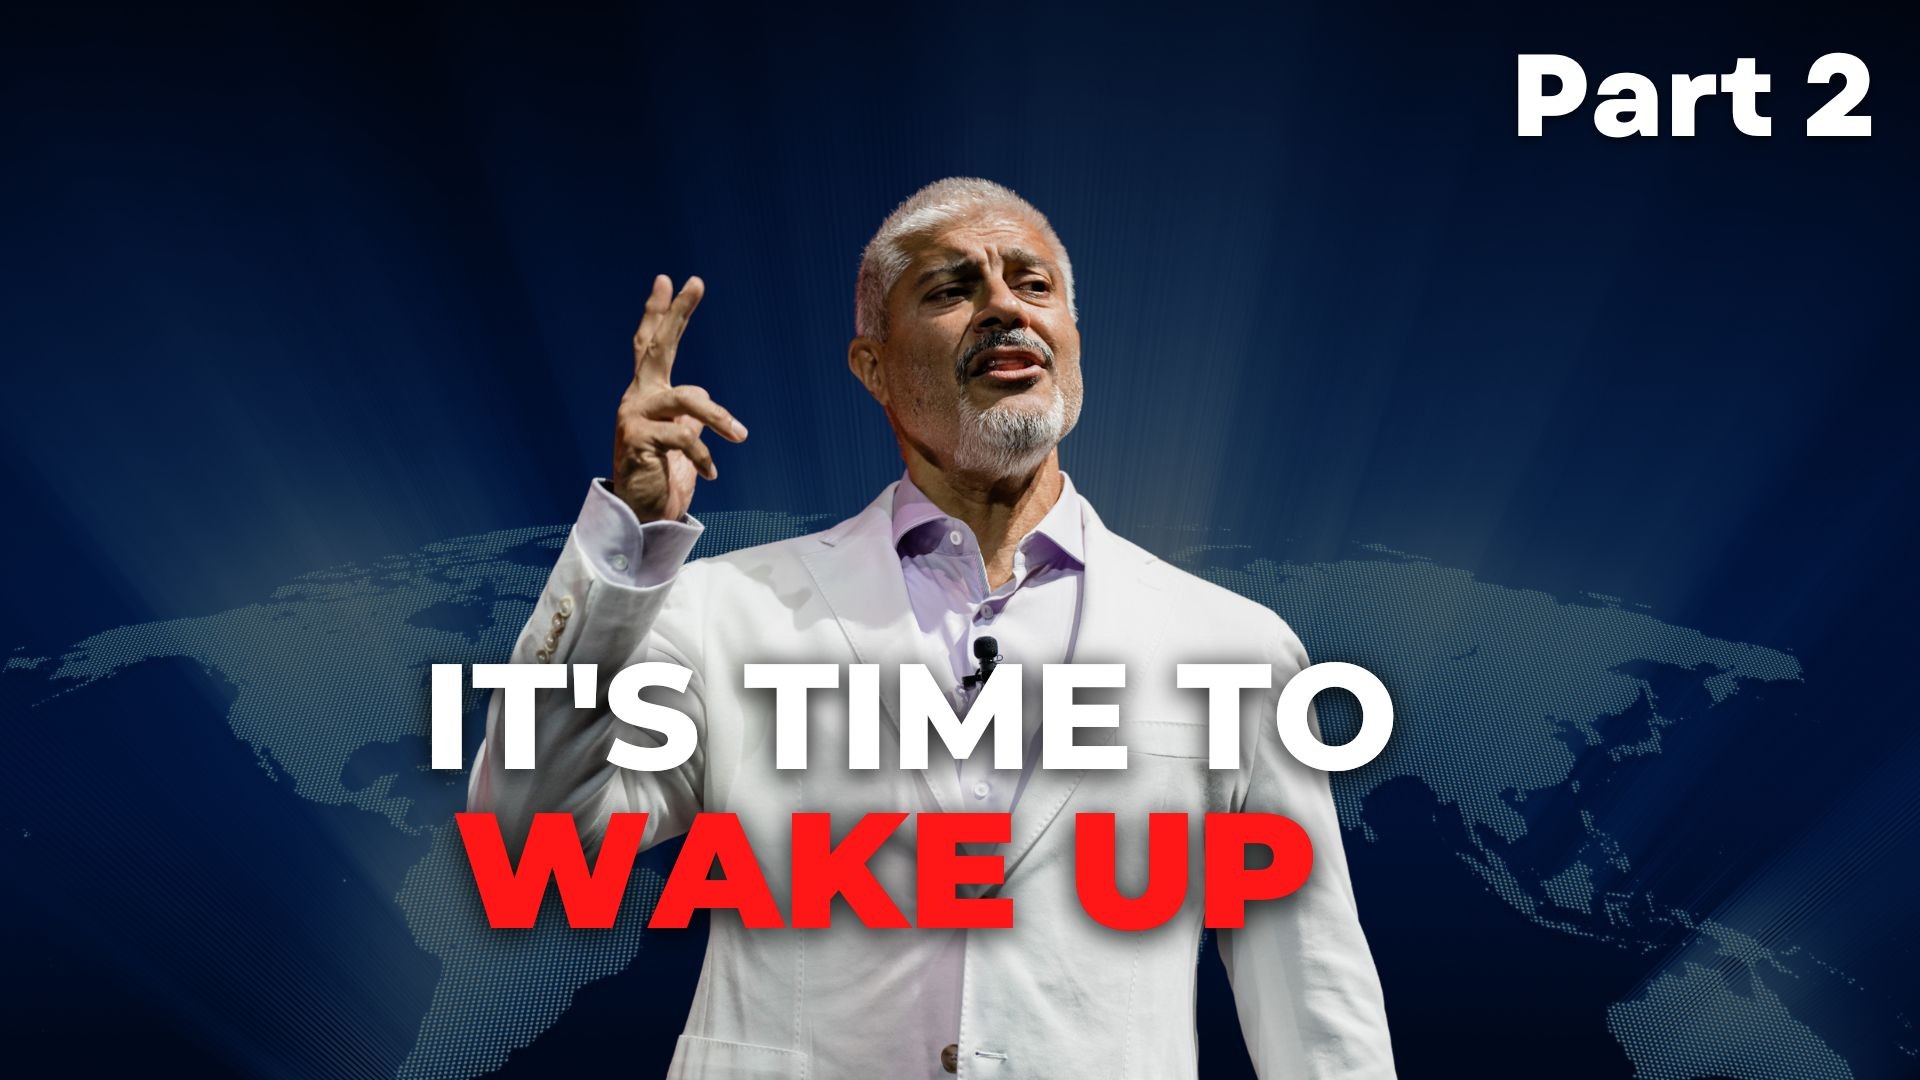 â�£It's Time To Wake Up (Part 2 of 4) - Dr Rashid A Buttar